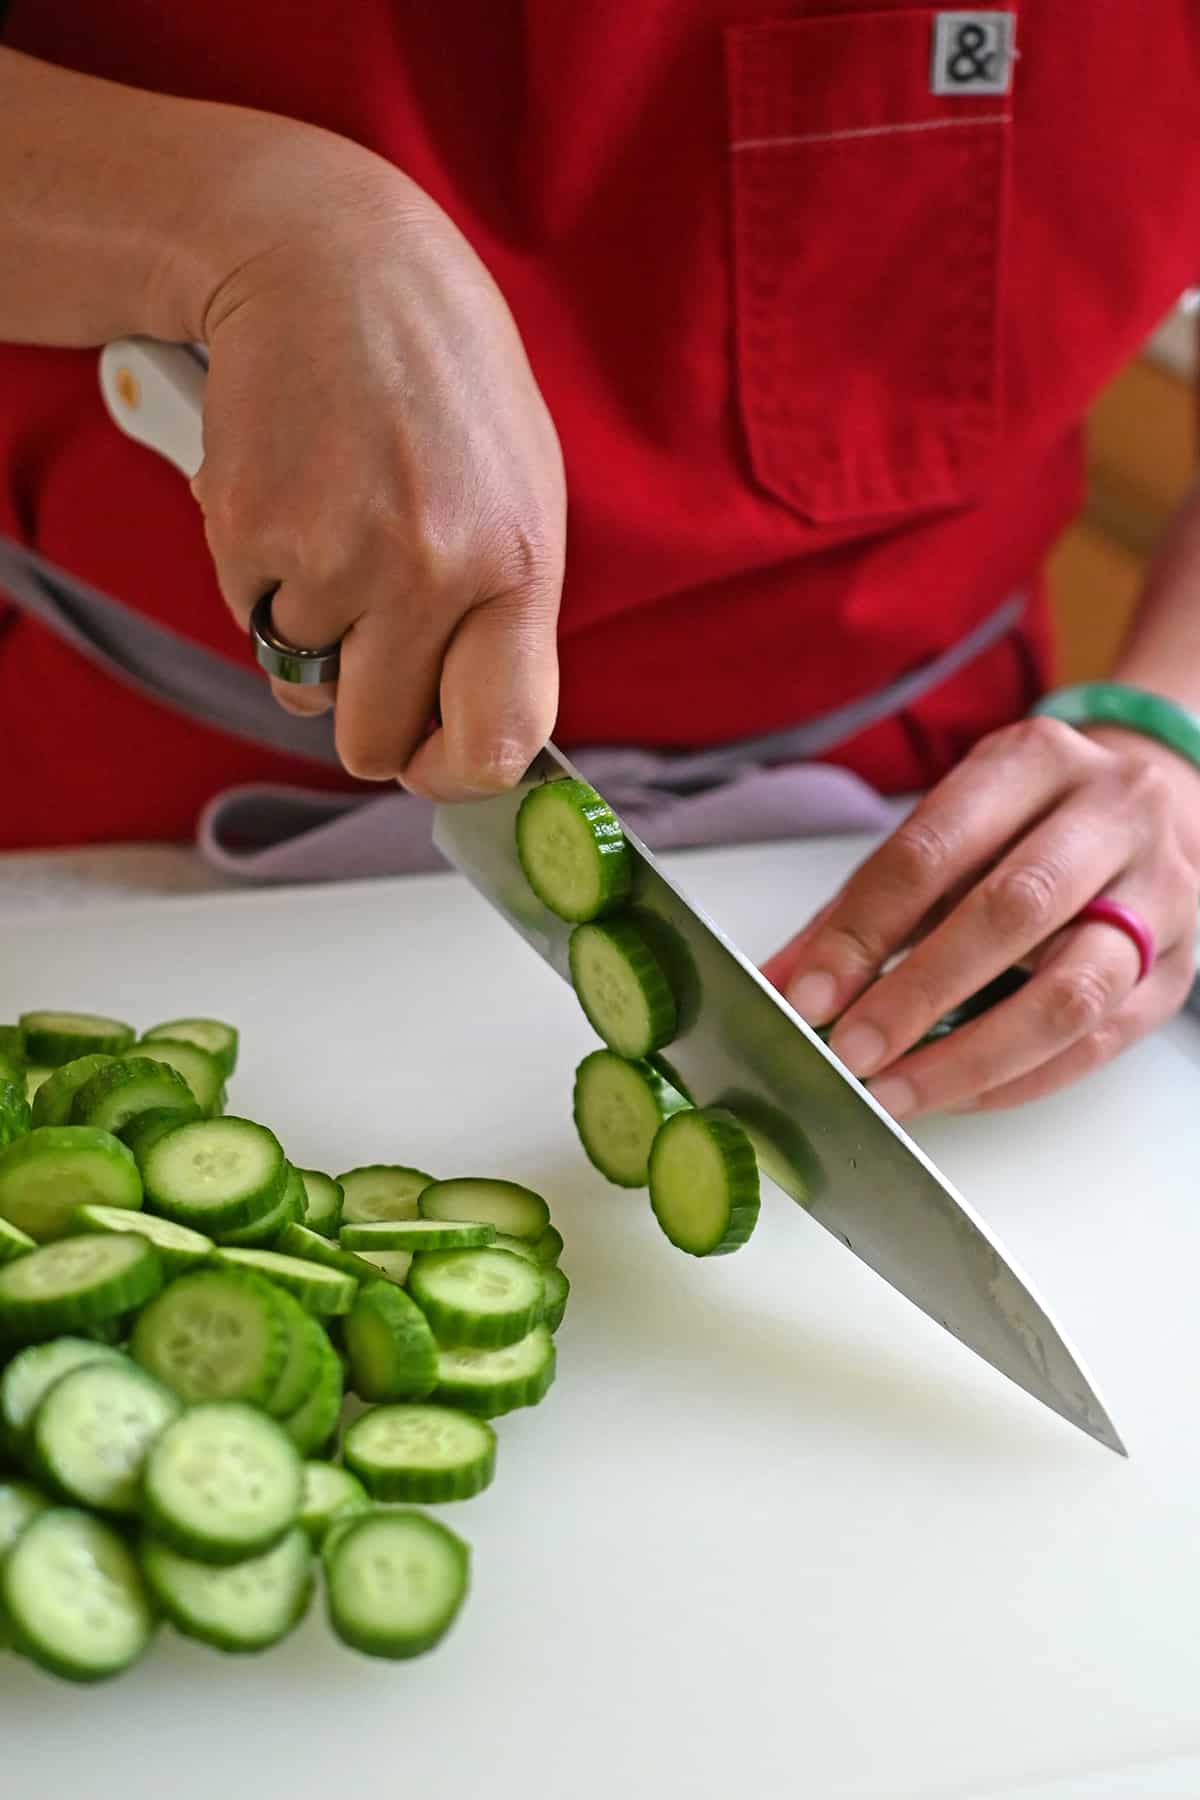 A person in a red apron is cutting Persian cucumbers into thin slices with a chef knife.